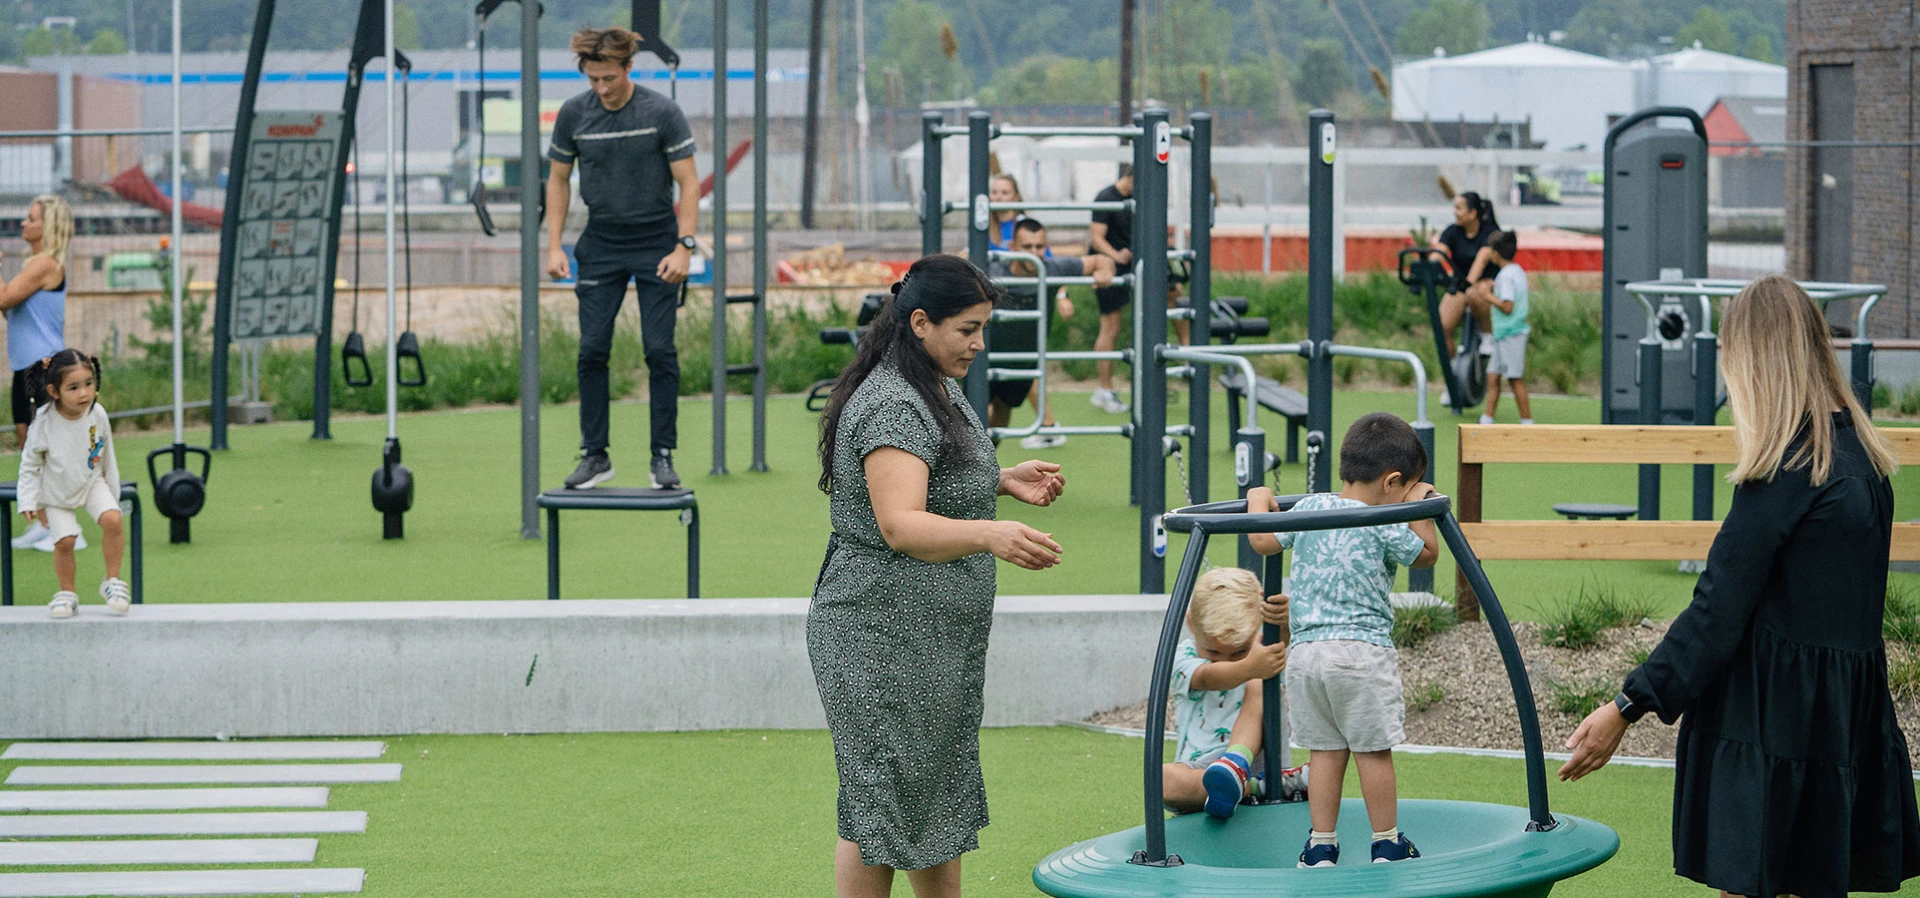 Parents and children play and working out